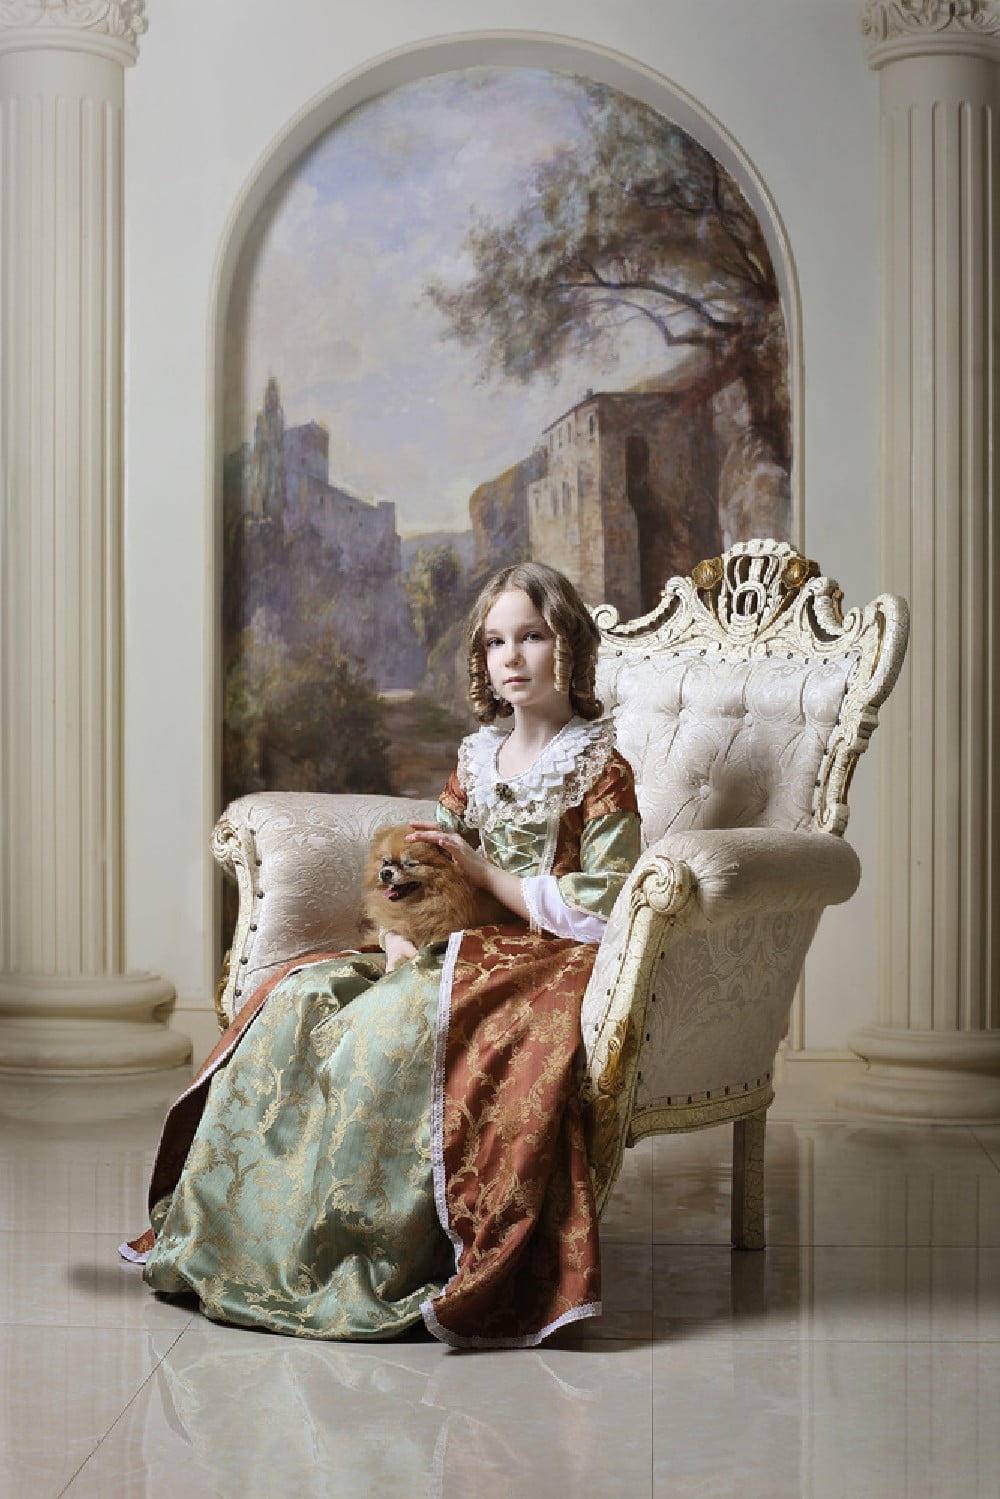 Her Highness And The Doggy Poster 50x70 cm